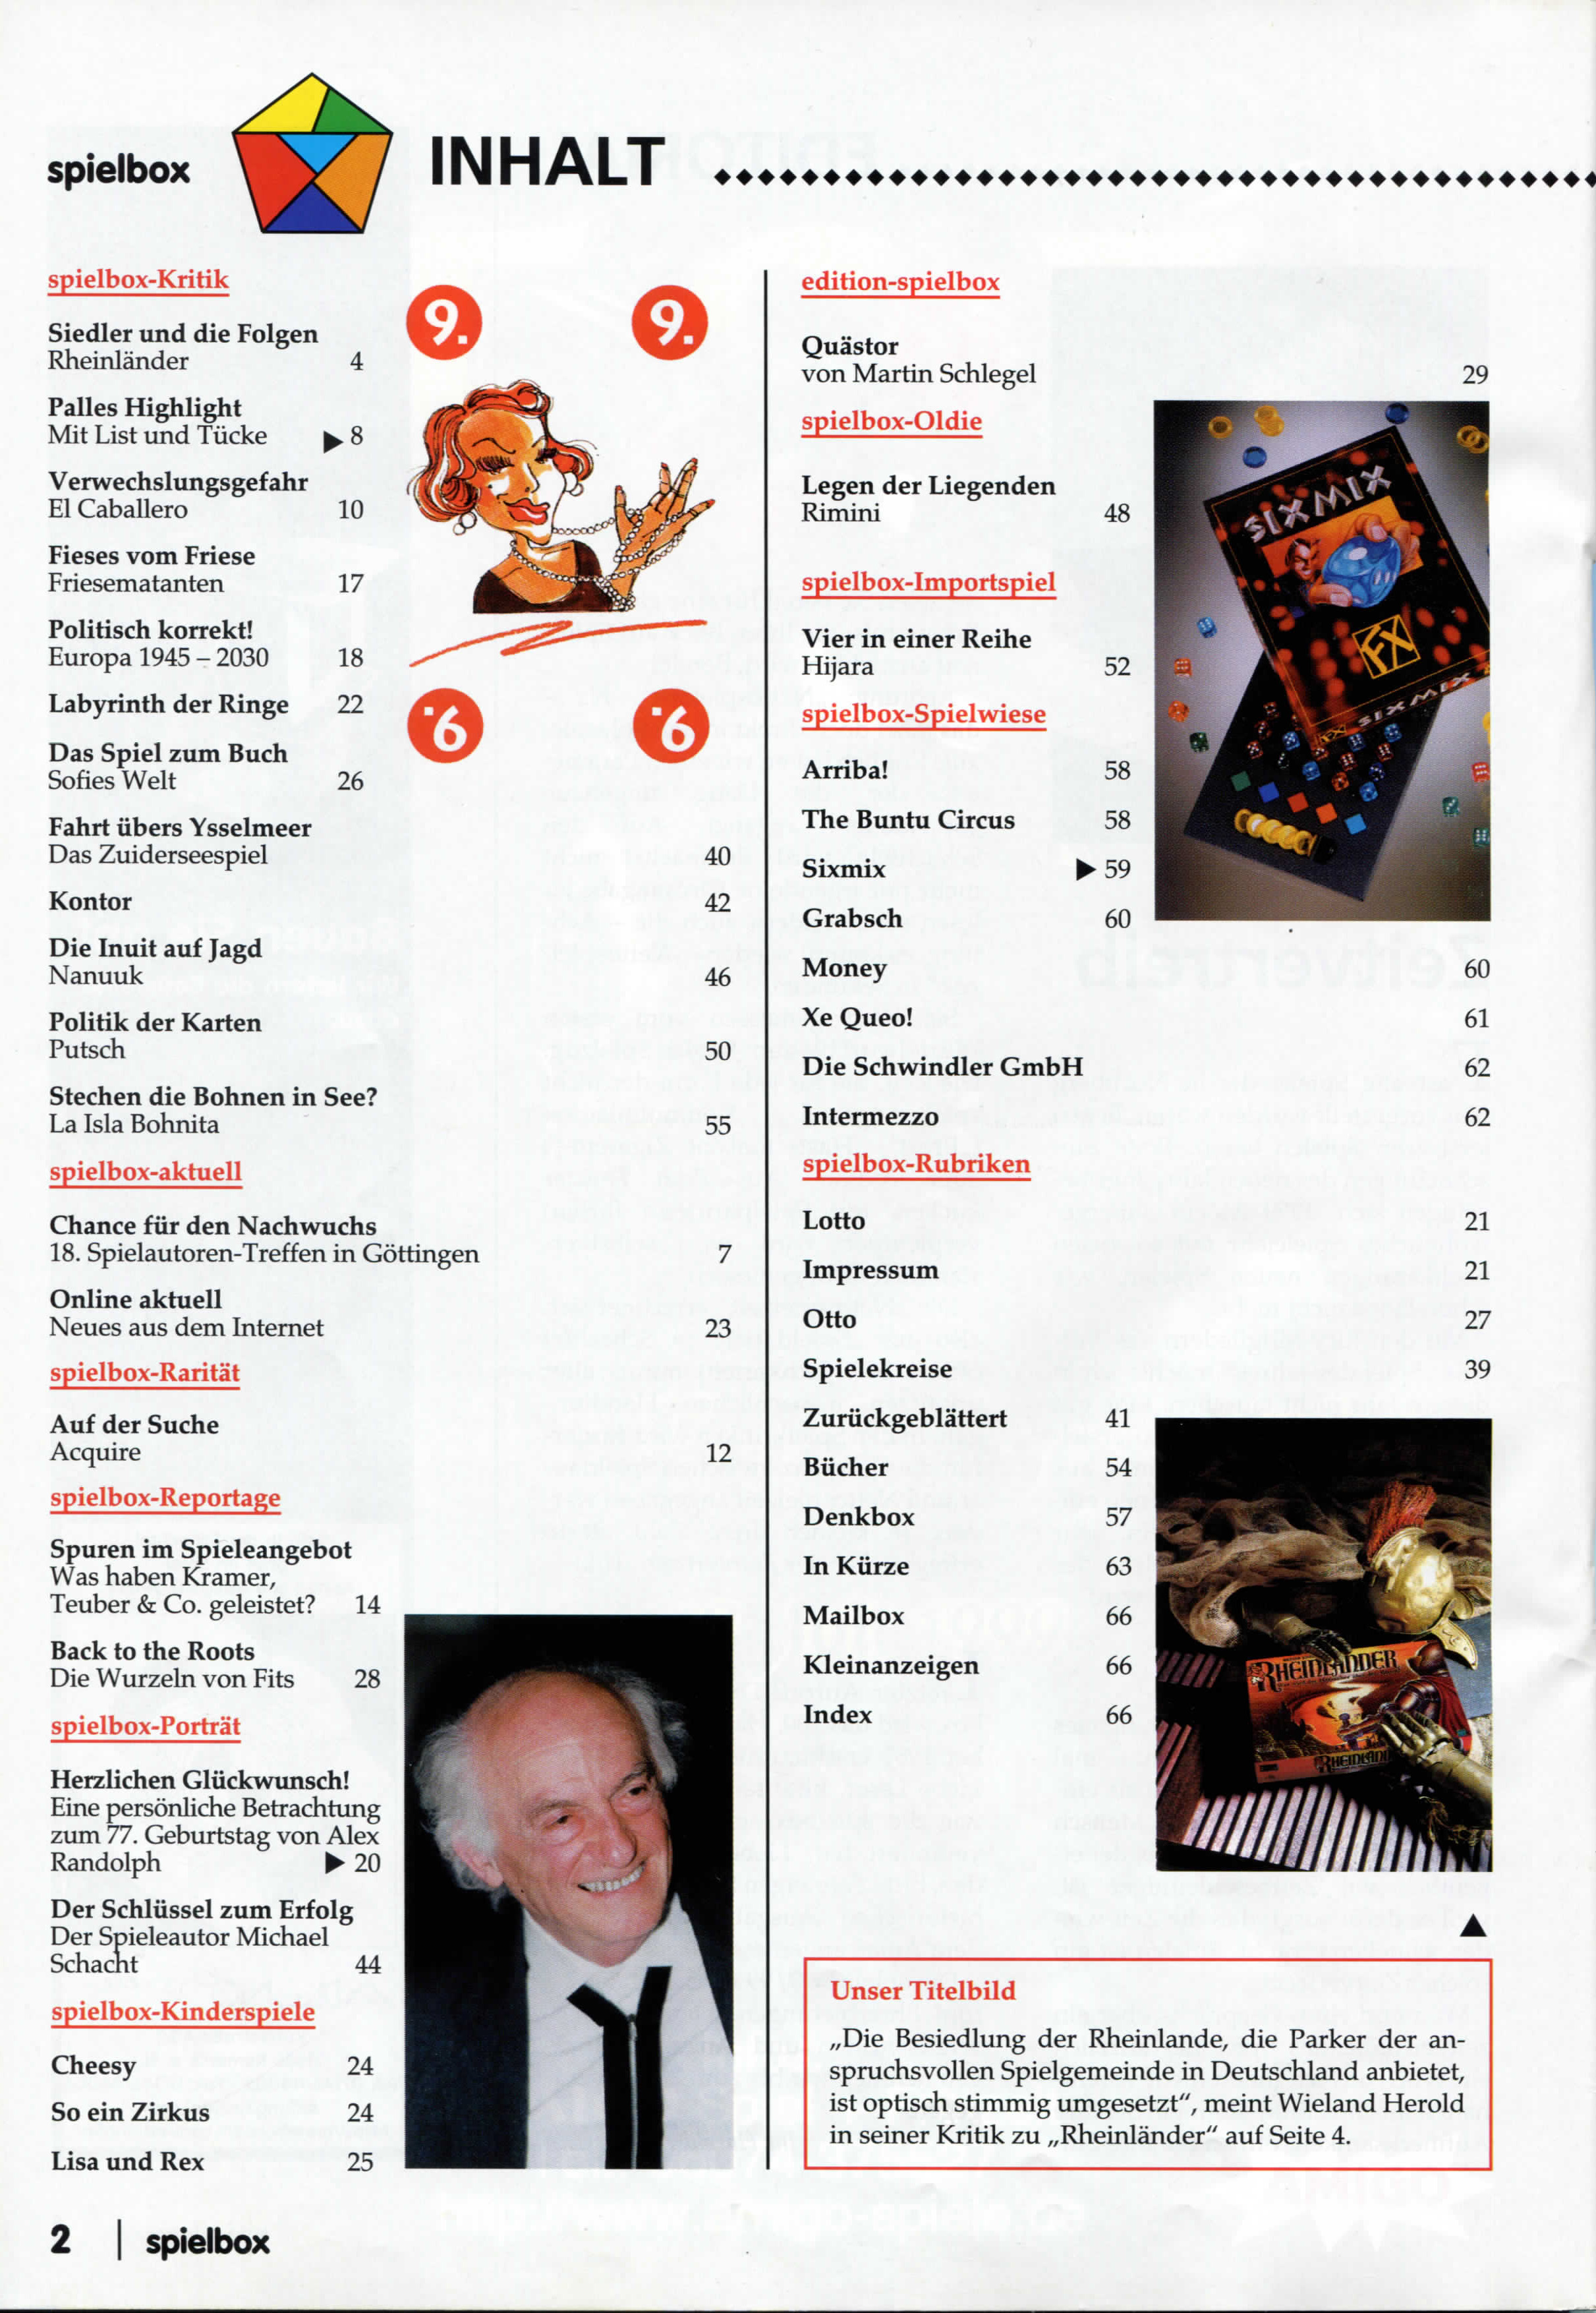 Spielbox Magazine, May/June 1999 - Table of Contents